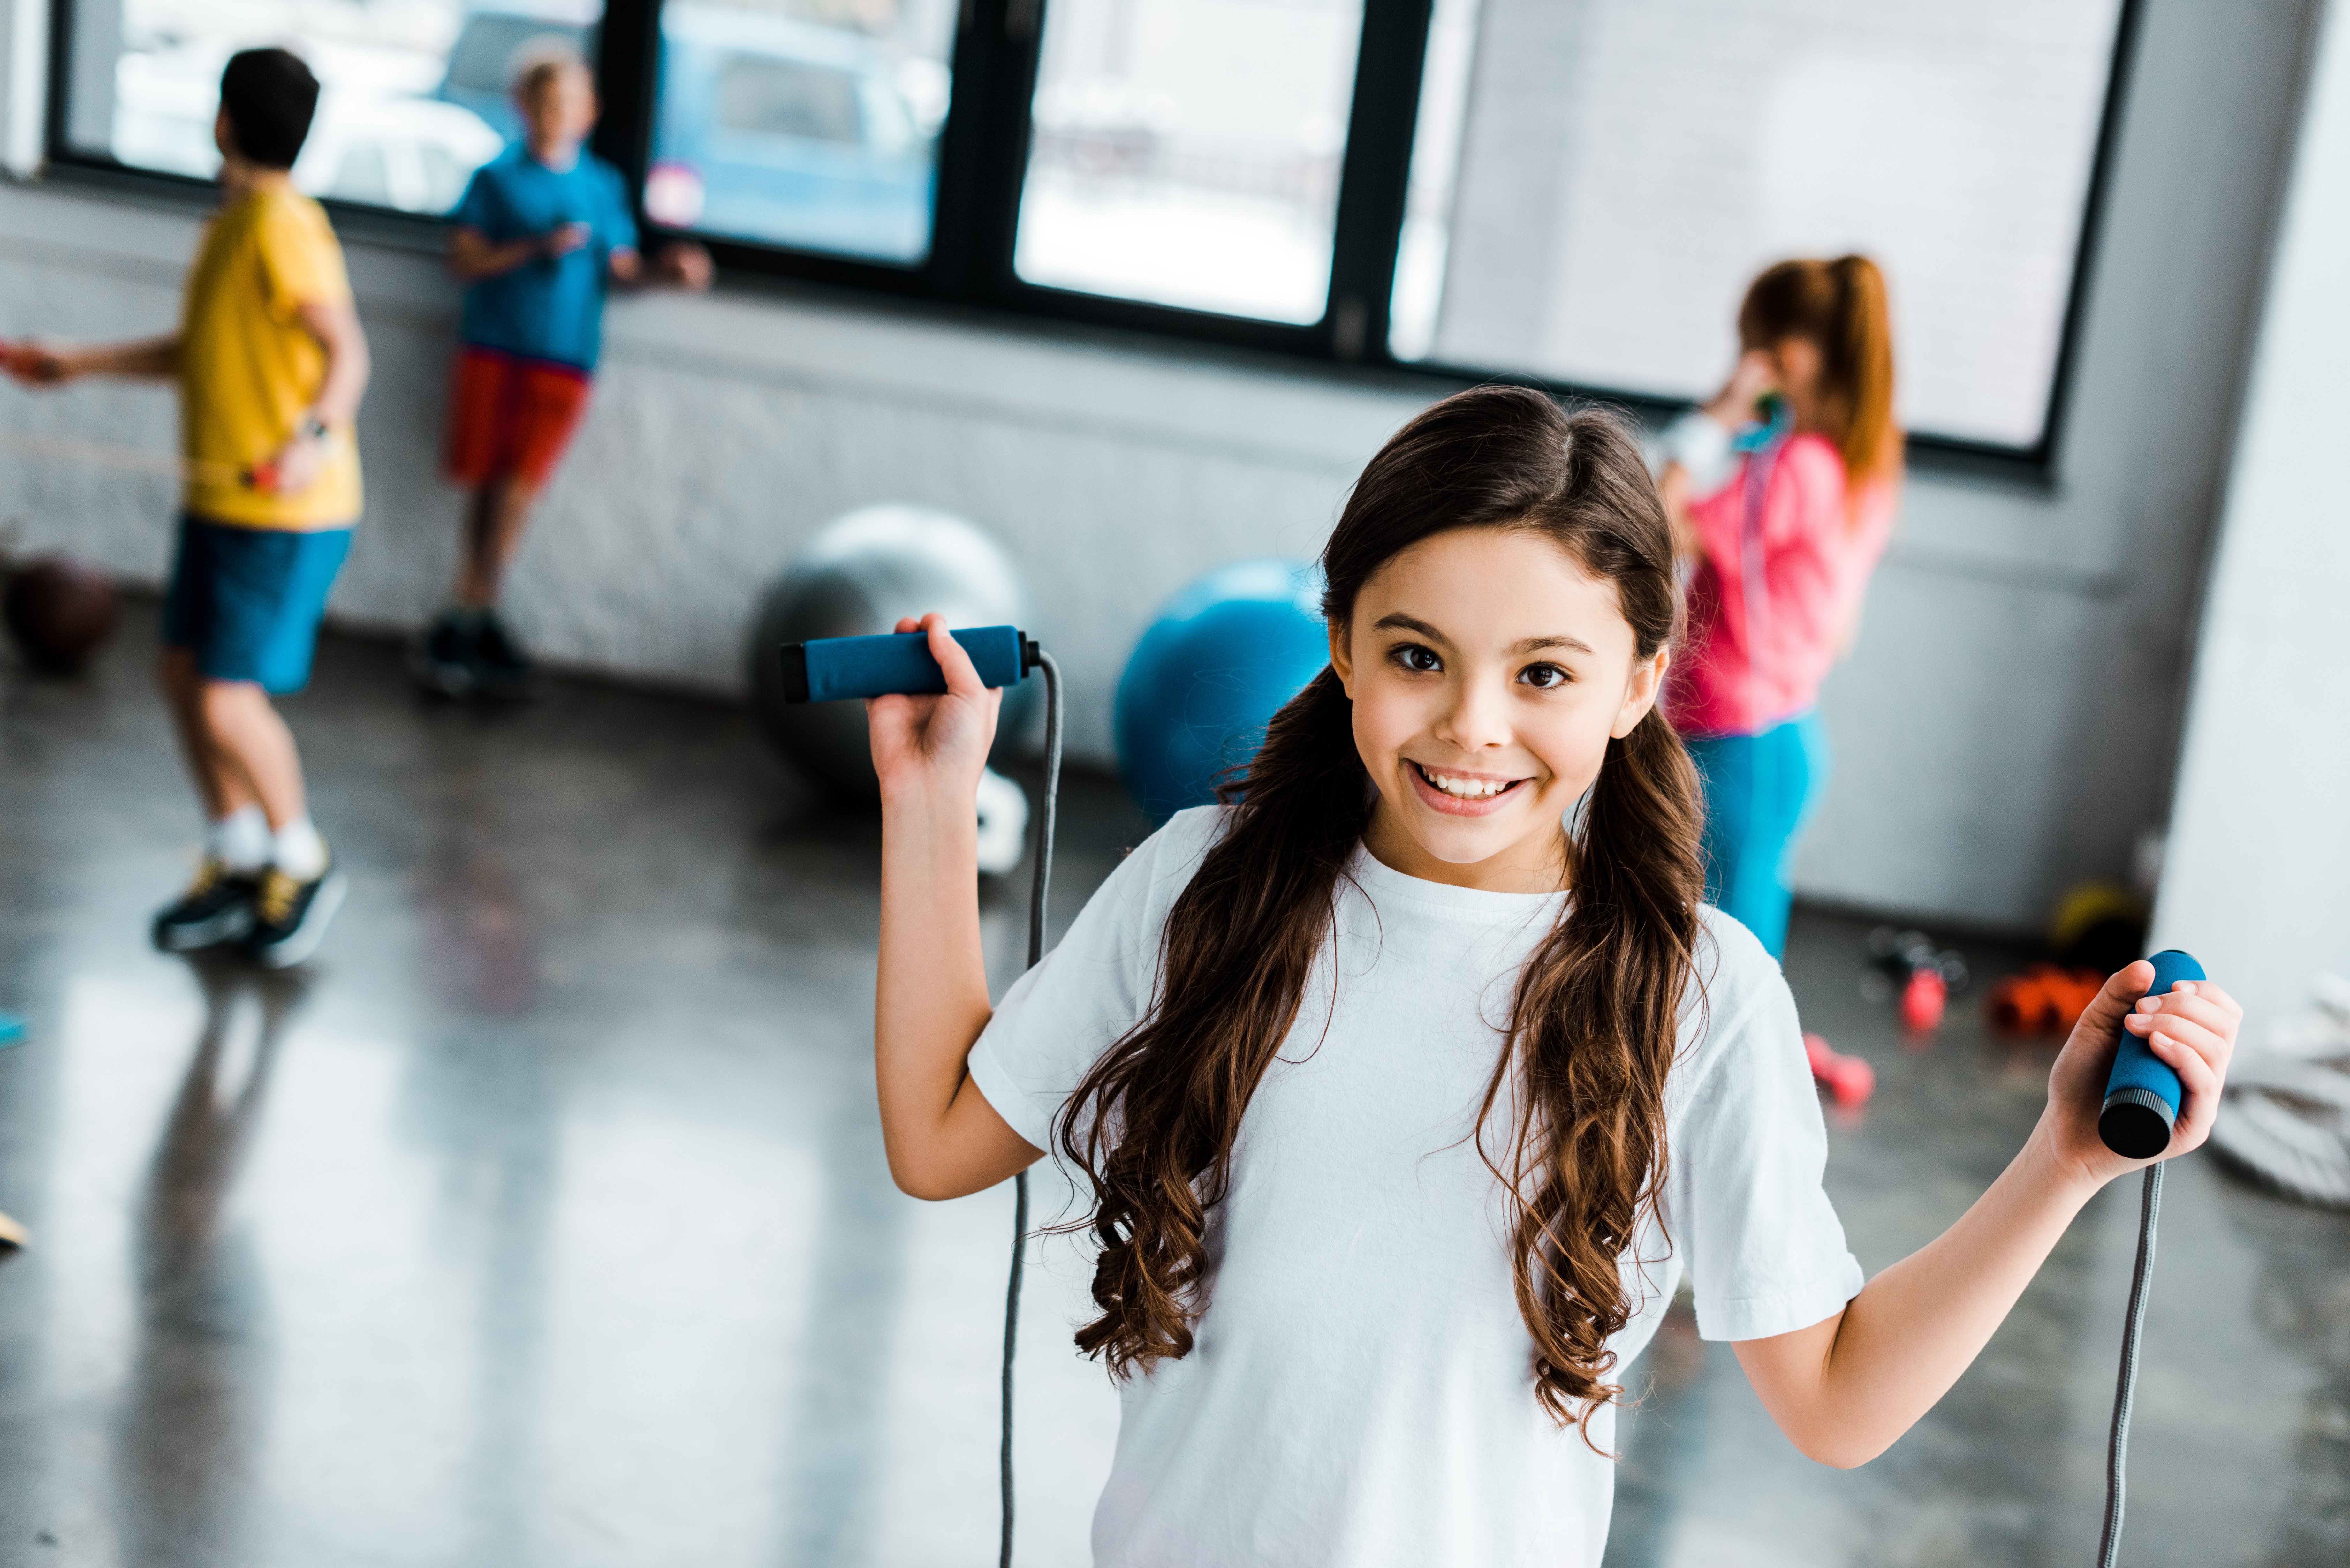 playful-child-posing-in-gym-with-skipping-rope-2021-09-15-00-50-59-utc